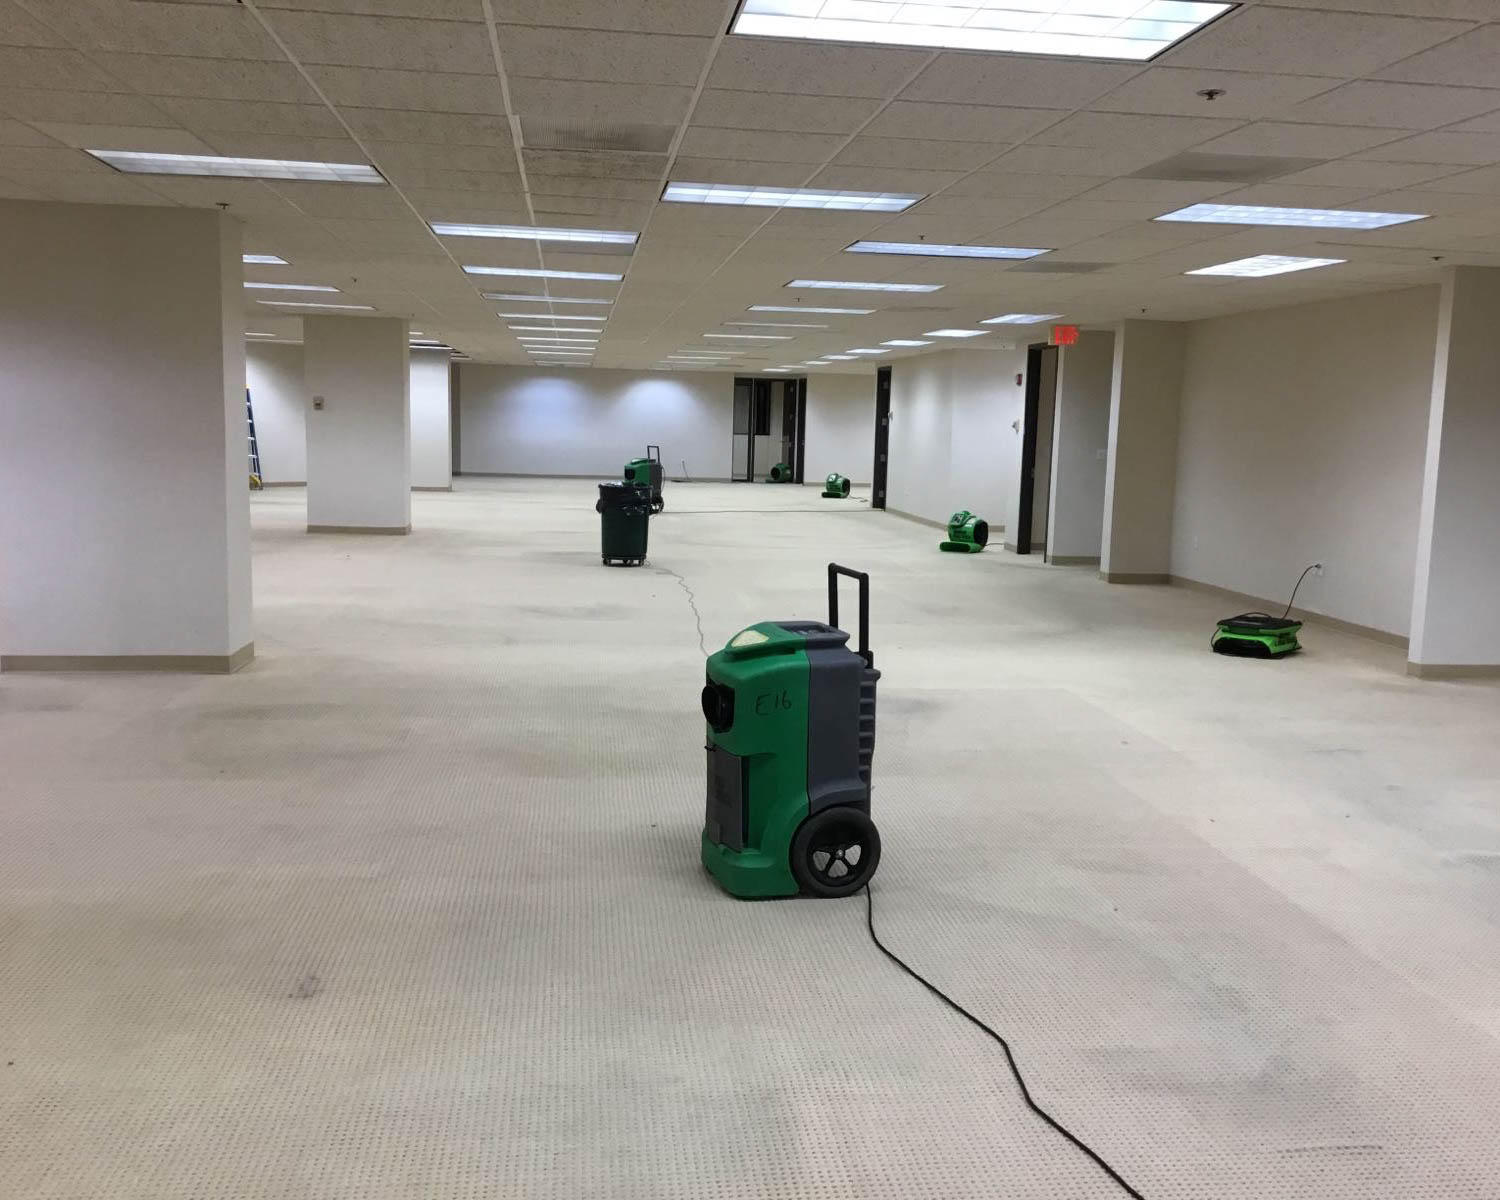 SERVPRO of Deerfield Beach is the first choice for residential and commercial water damage in Boca Raton, FL because of our latest equipment, skills, and training. We're only a phone call away!